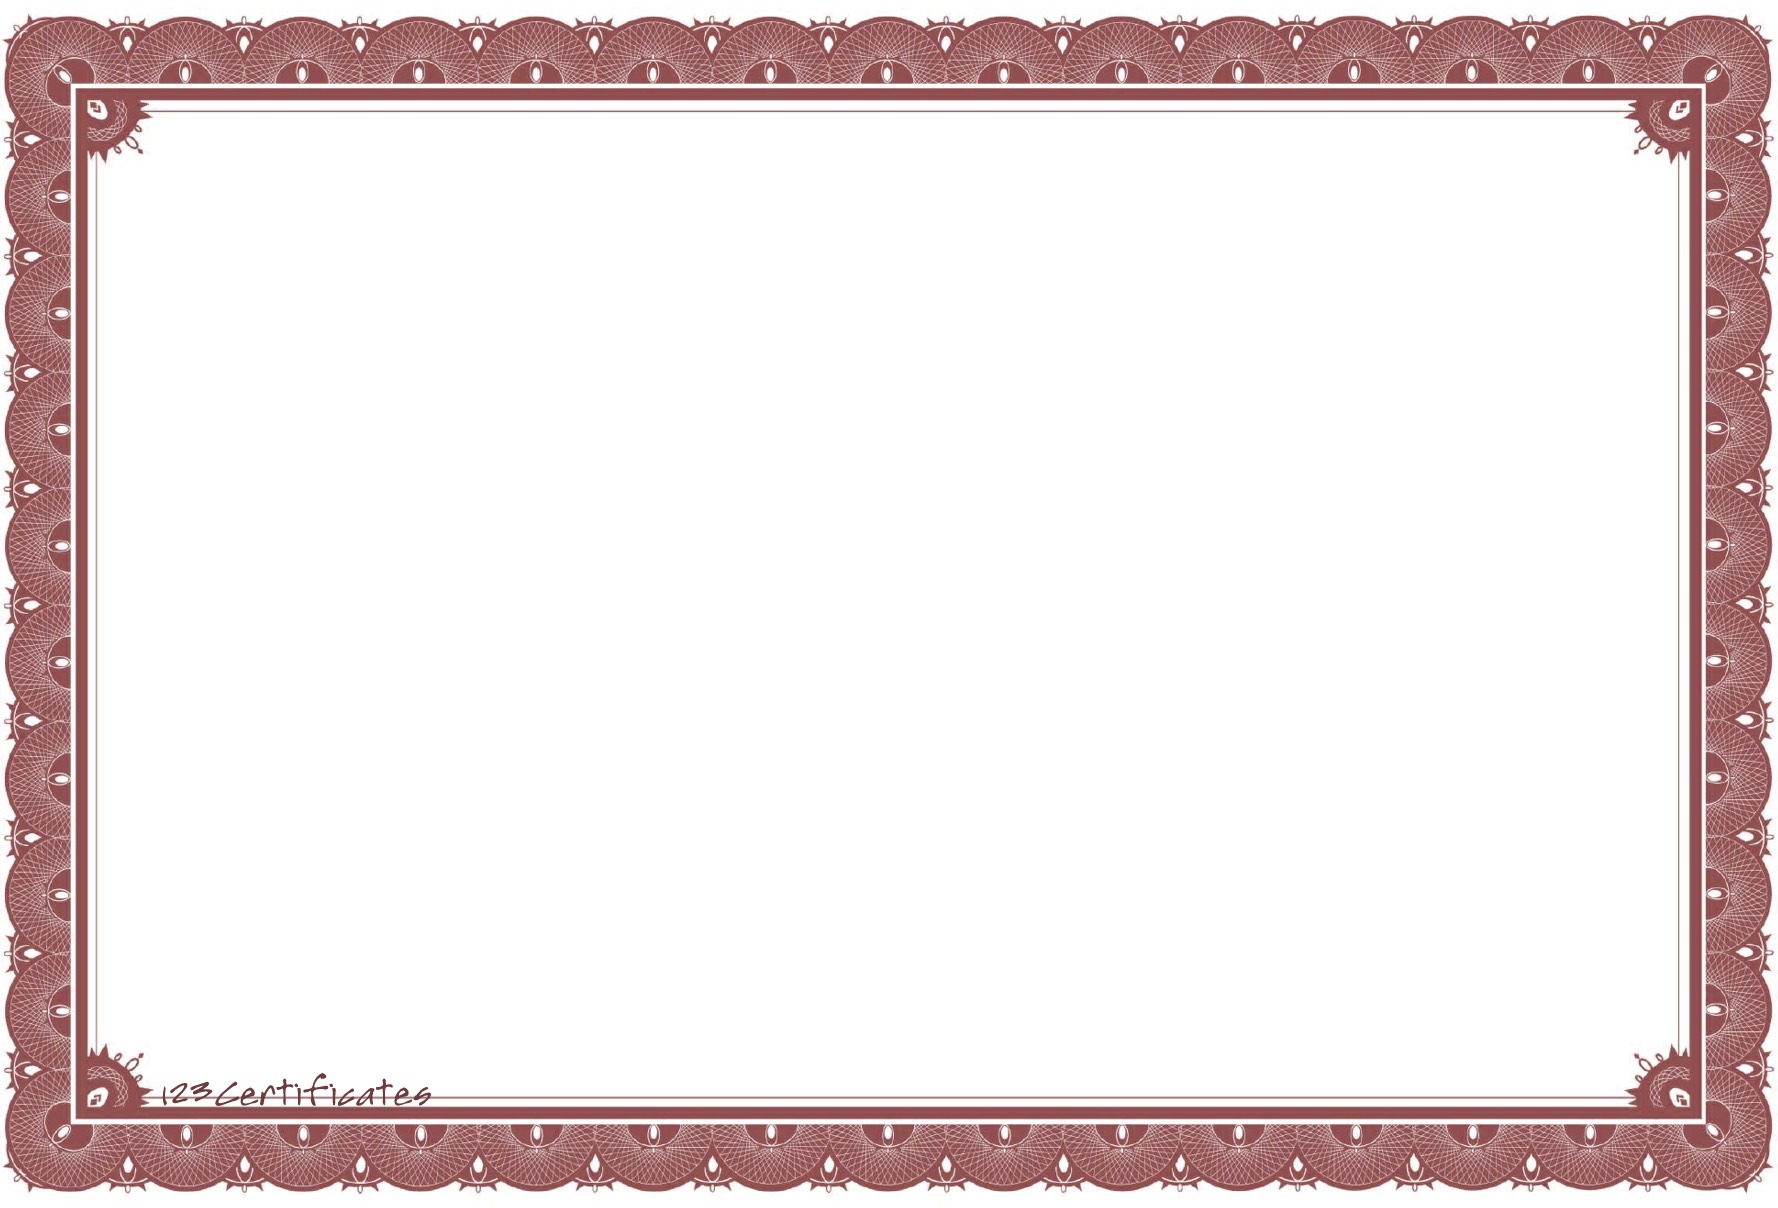 Top 10 Free Certificate Borders for All Occasions: Template ...